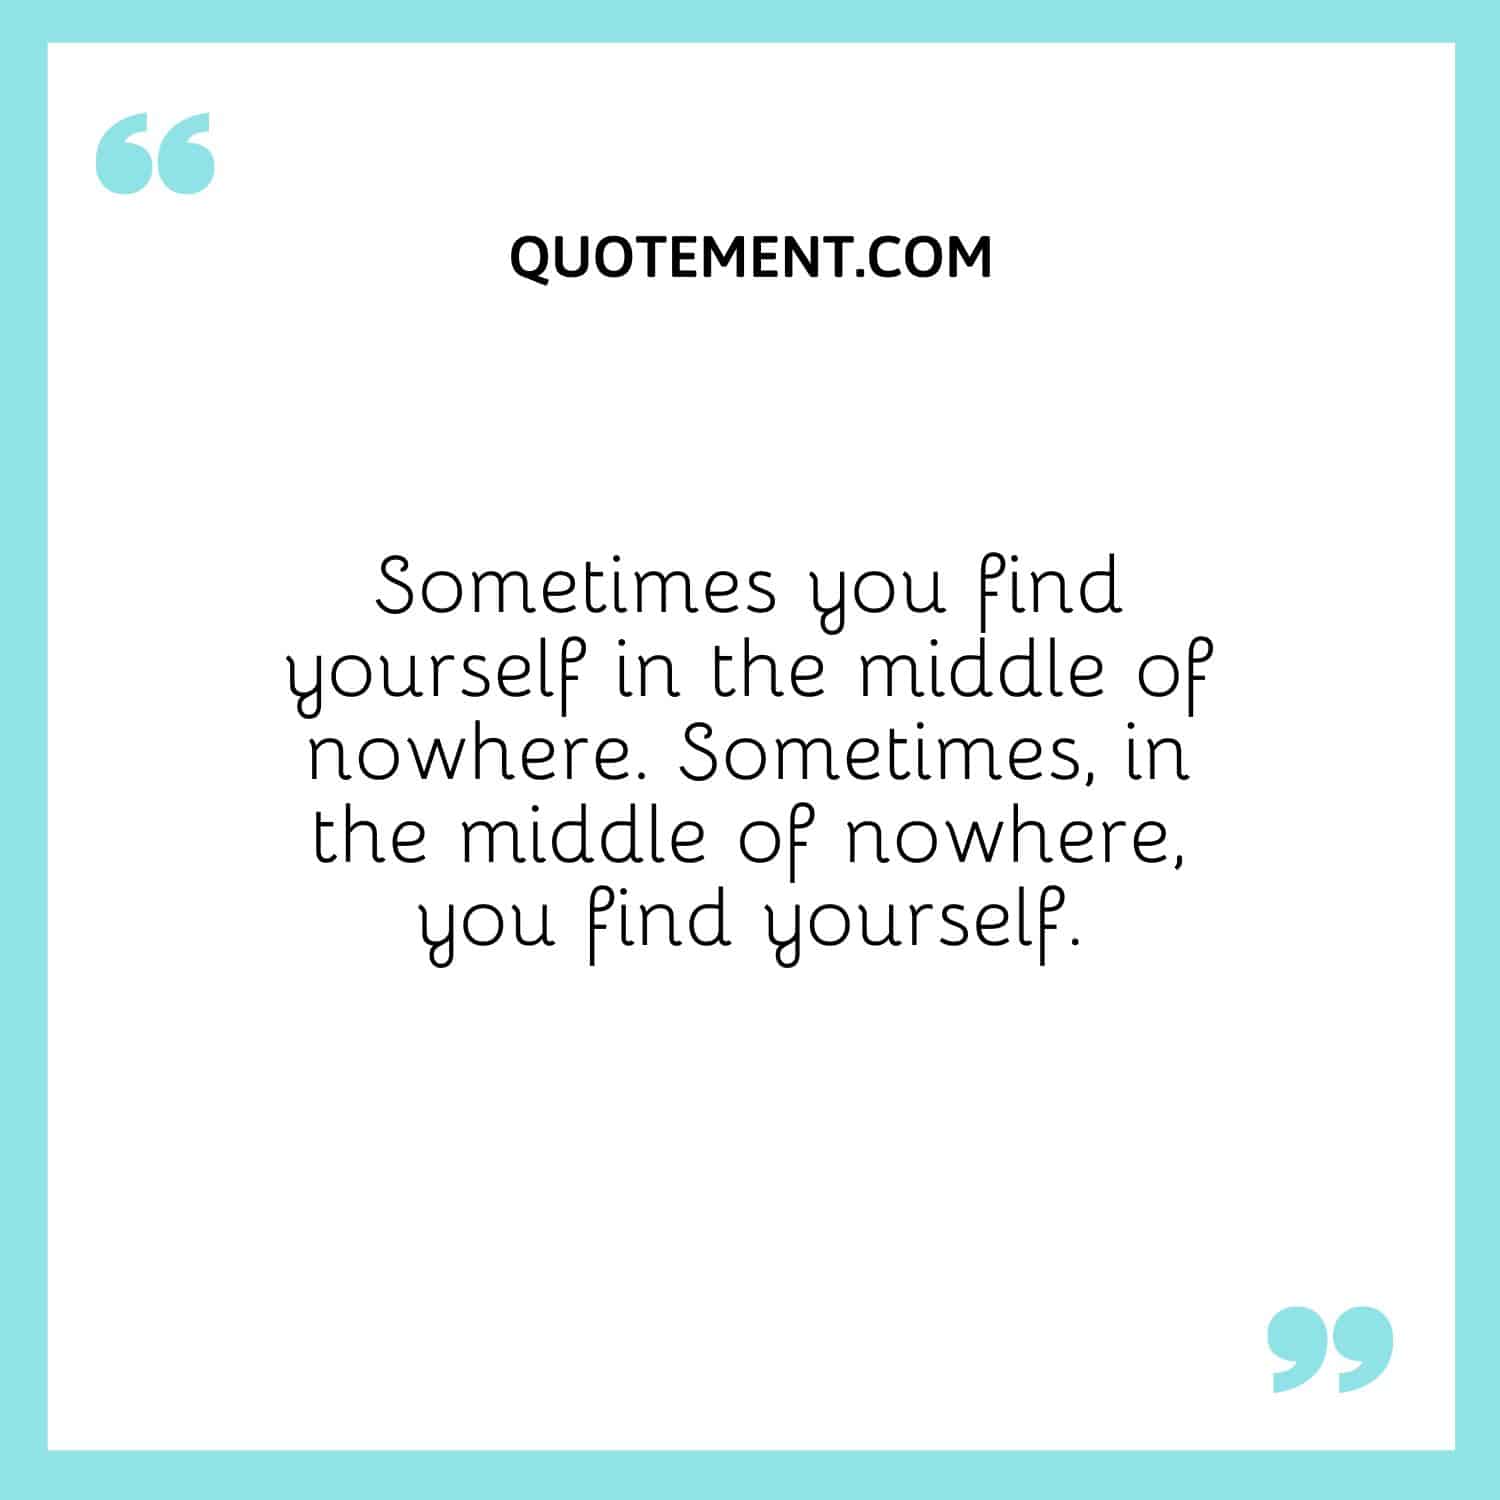 Sometimes, in the middle of nowhere, you find yourself.